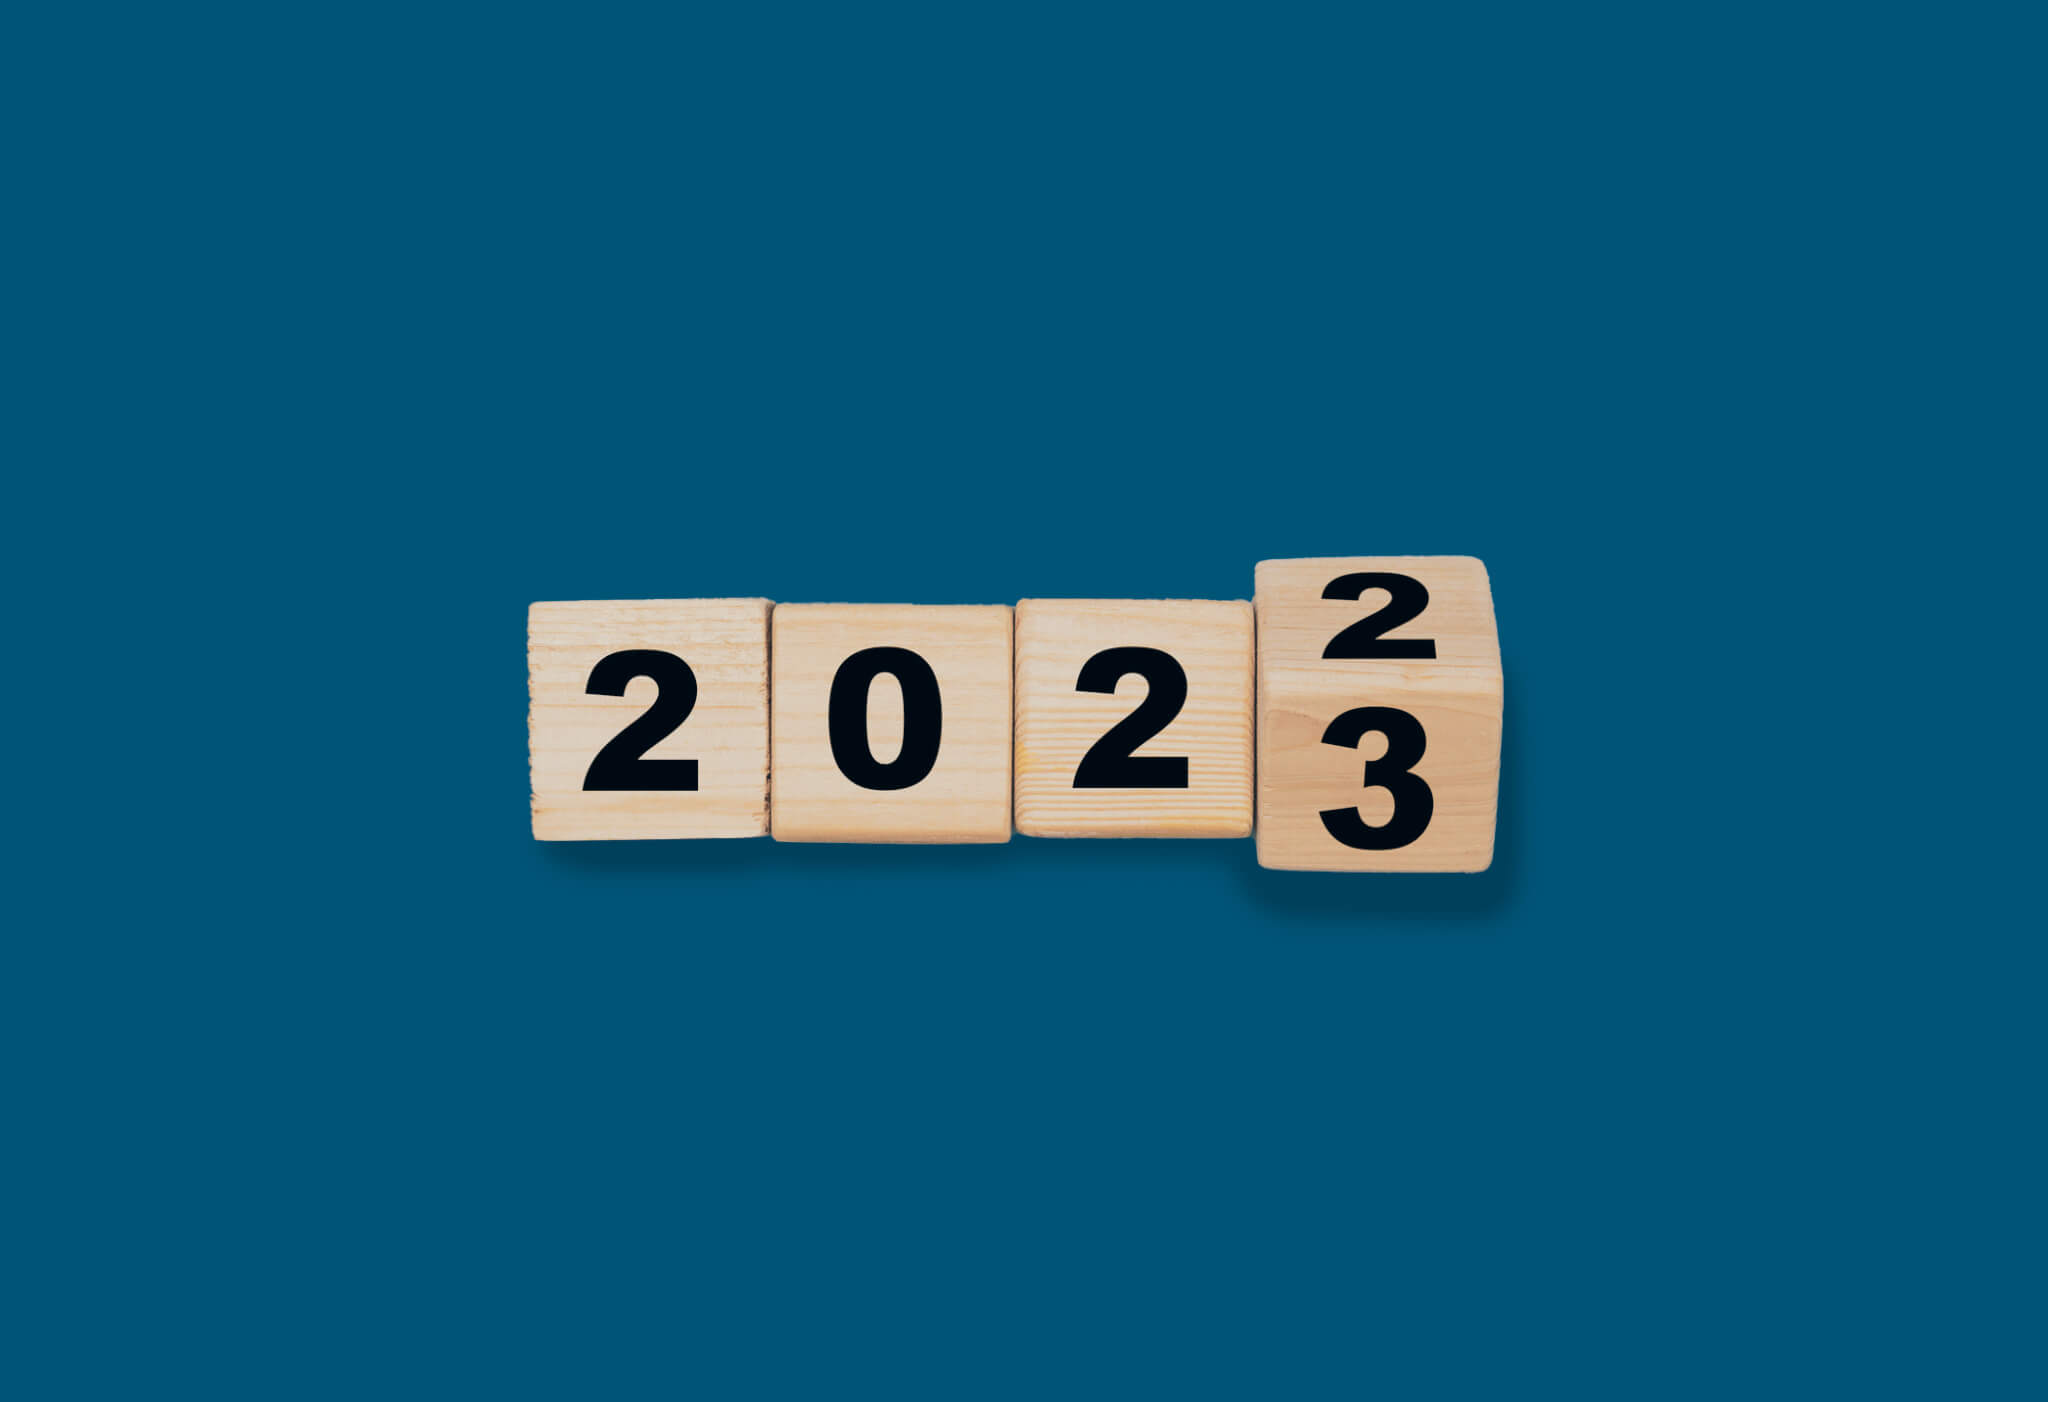 Get your strategy delivered in 2023